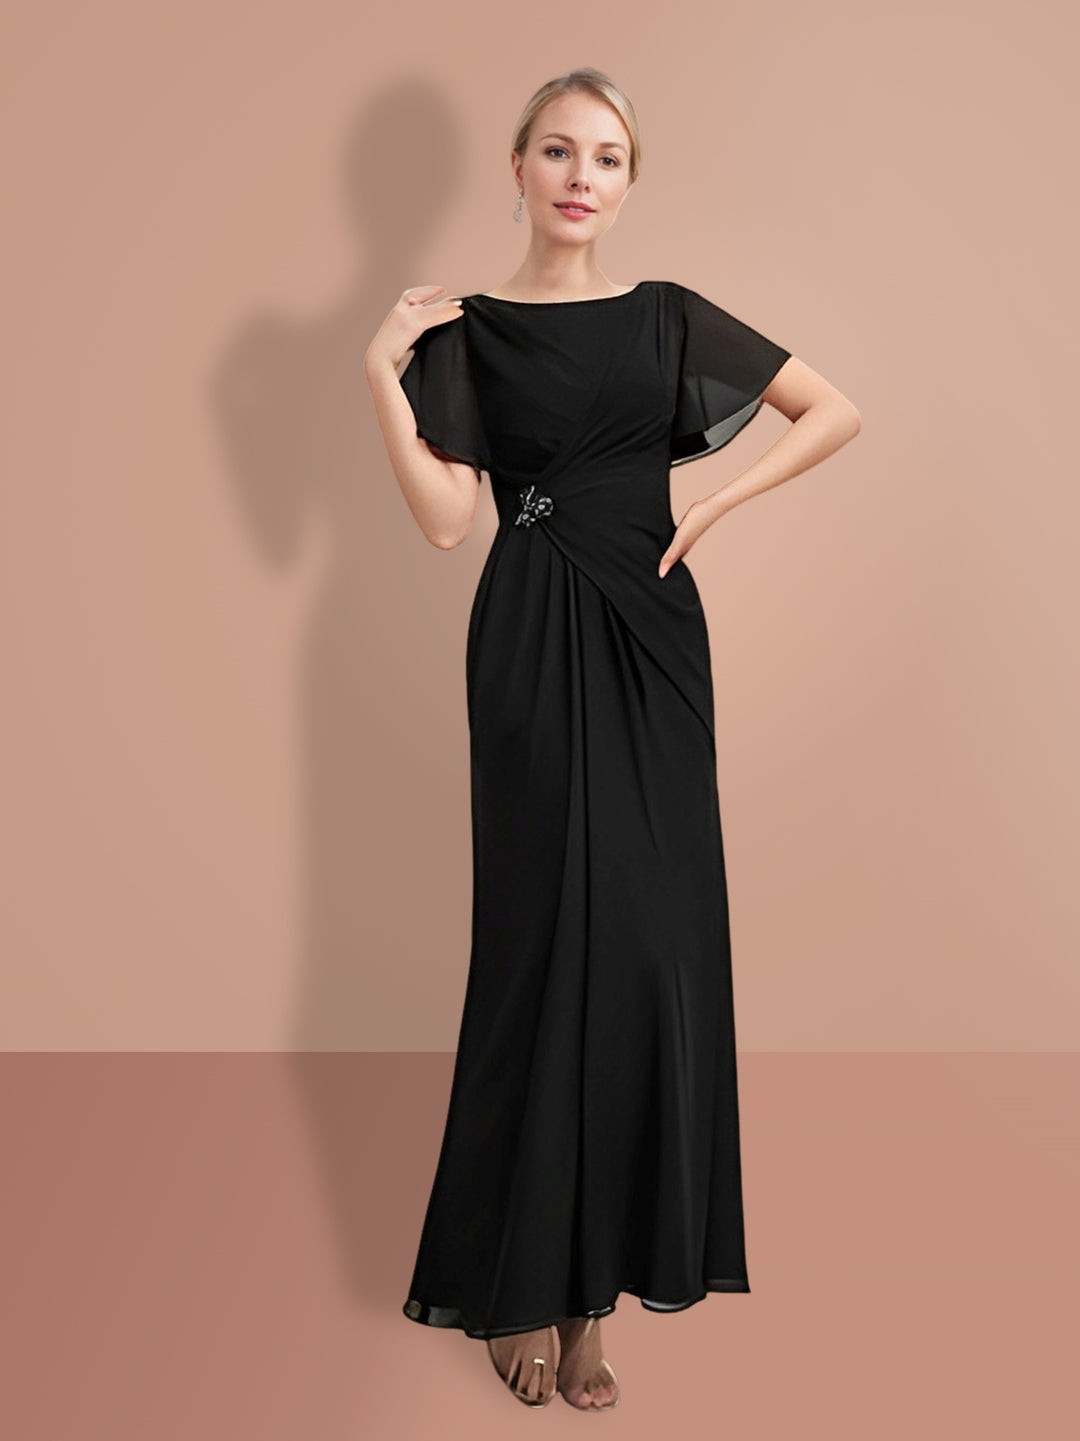 Sheath/Column Ankle-Length Short Sleeves Mother of the Bride Dresses